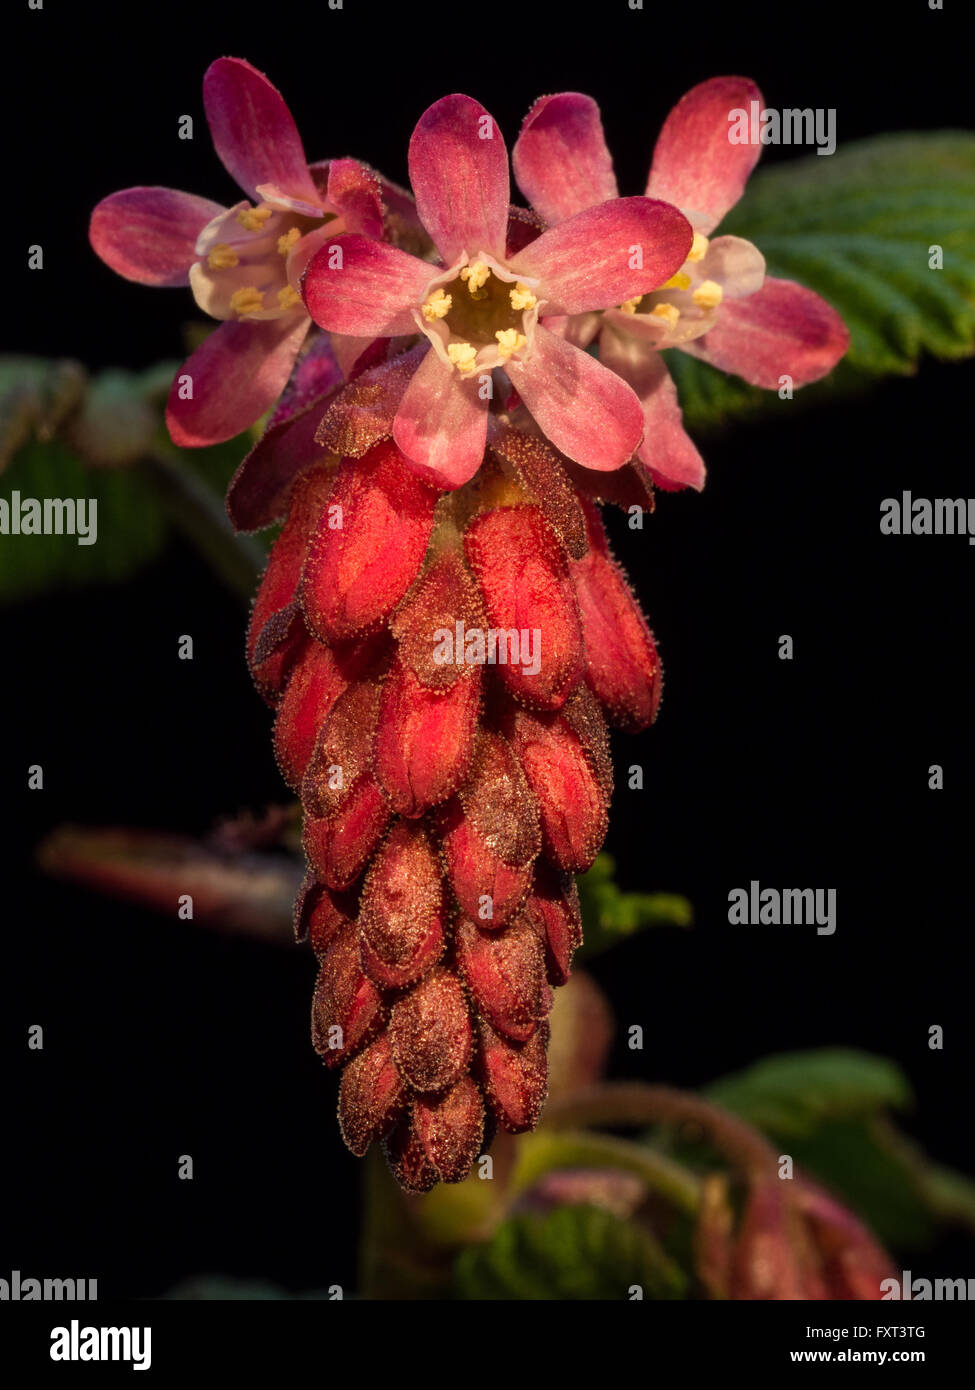 Close up of a flowering currant flower Stock Photo